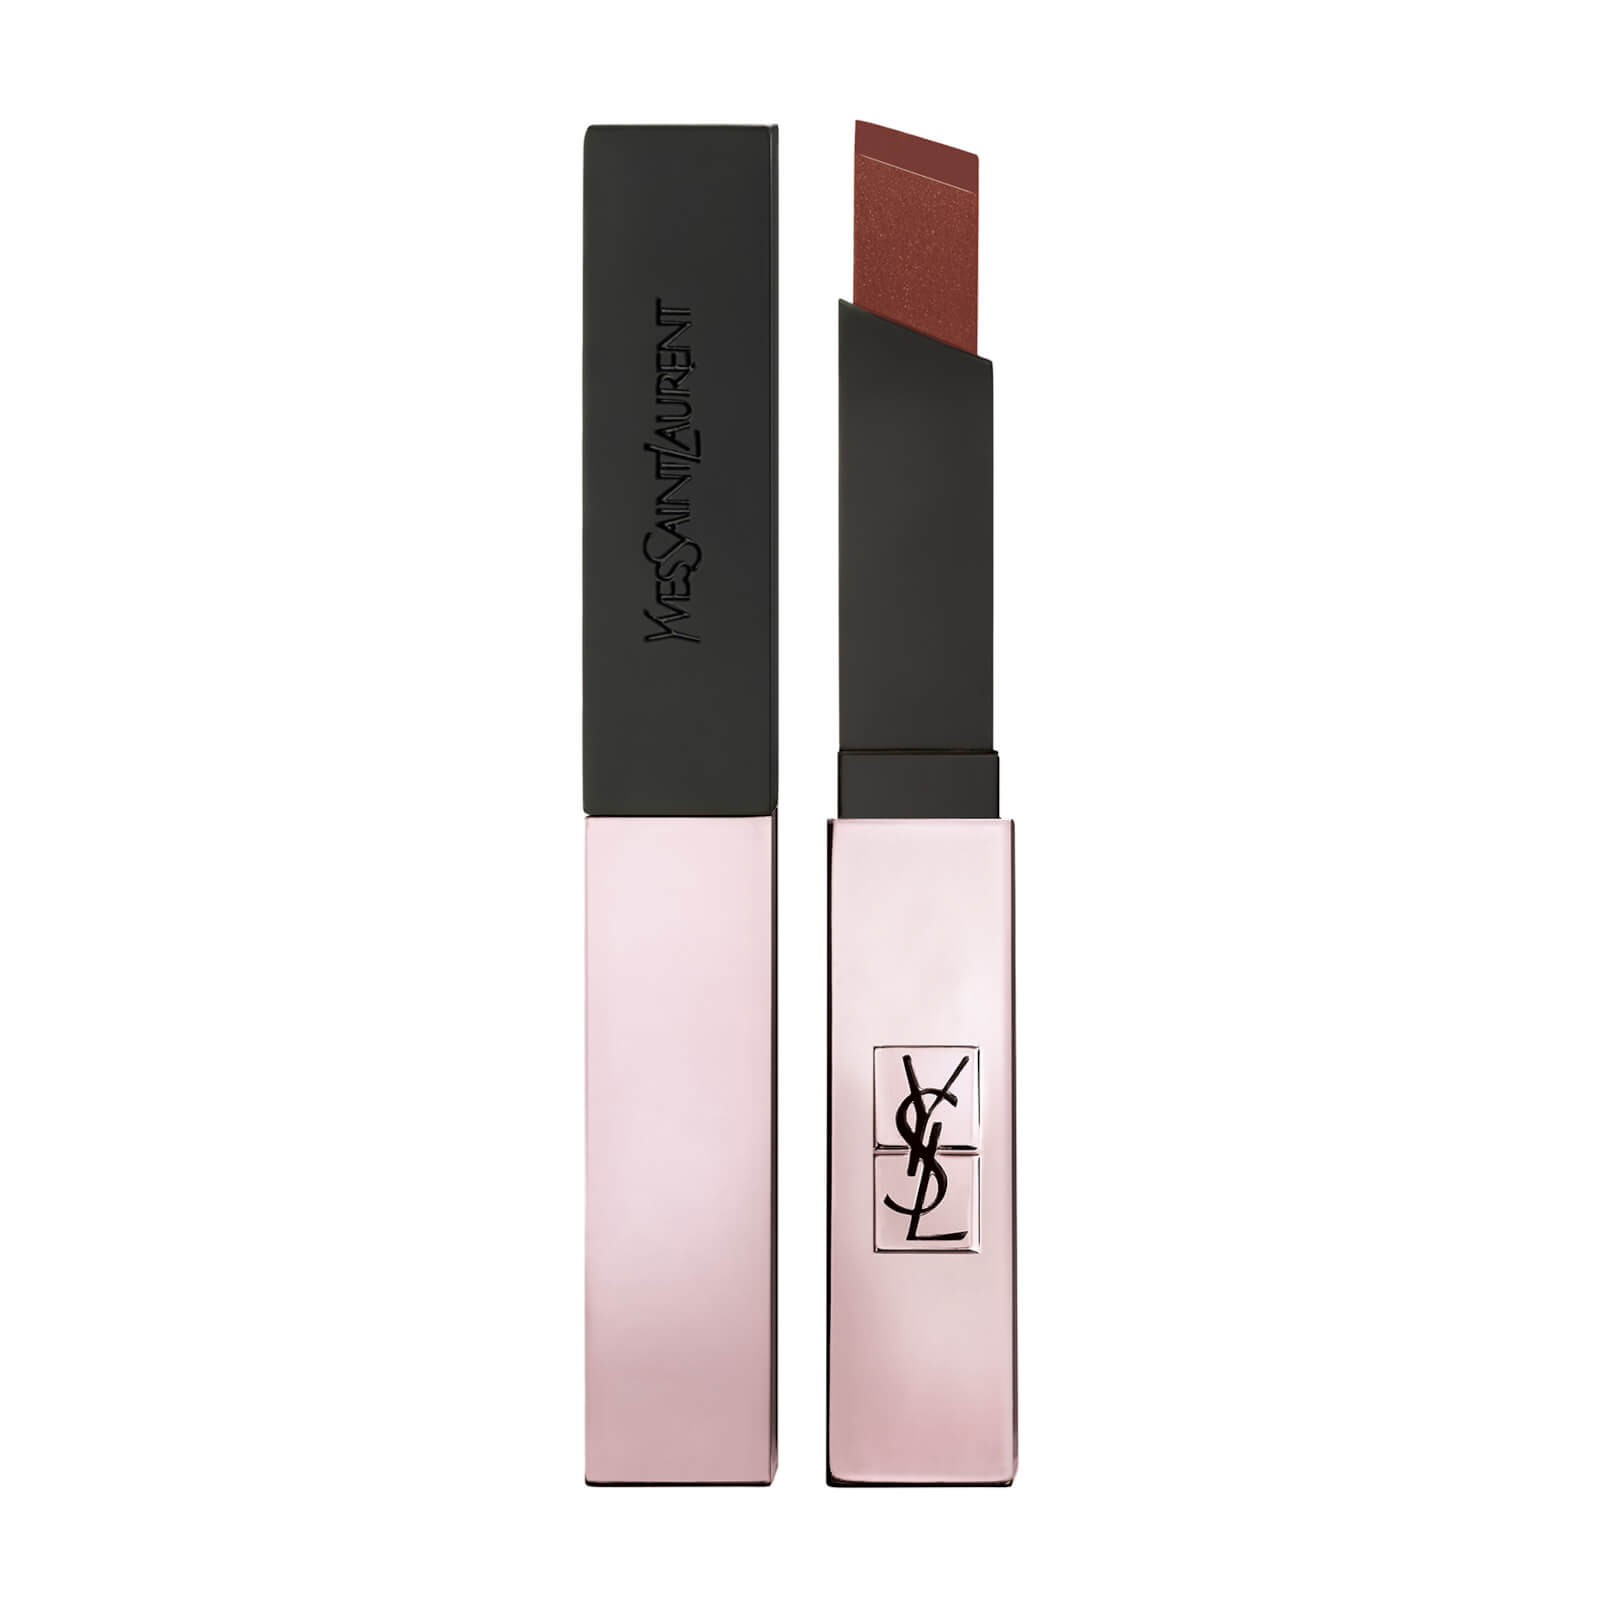 Yves Saint Laurent Rouge Pur Couture The Slim Glow Matte Lipstick 2g (Various Shades) - 211 Transgressive Cacao